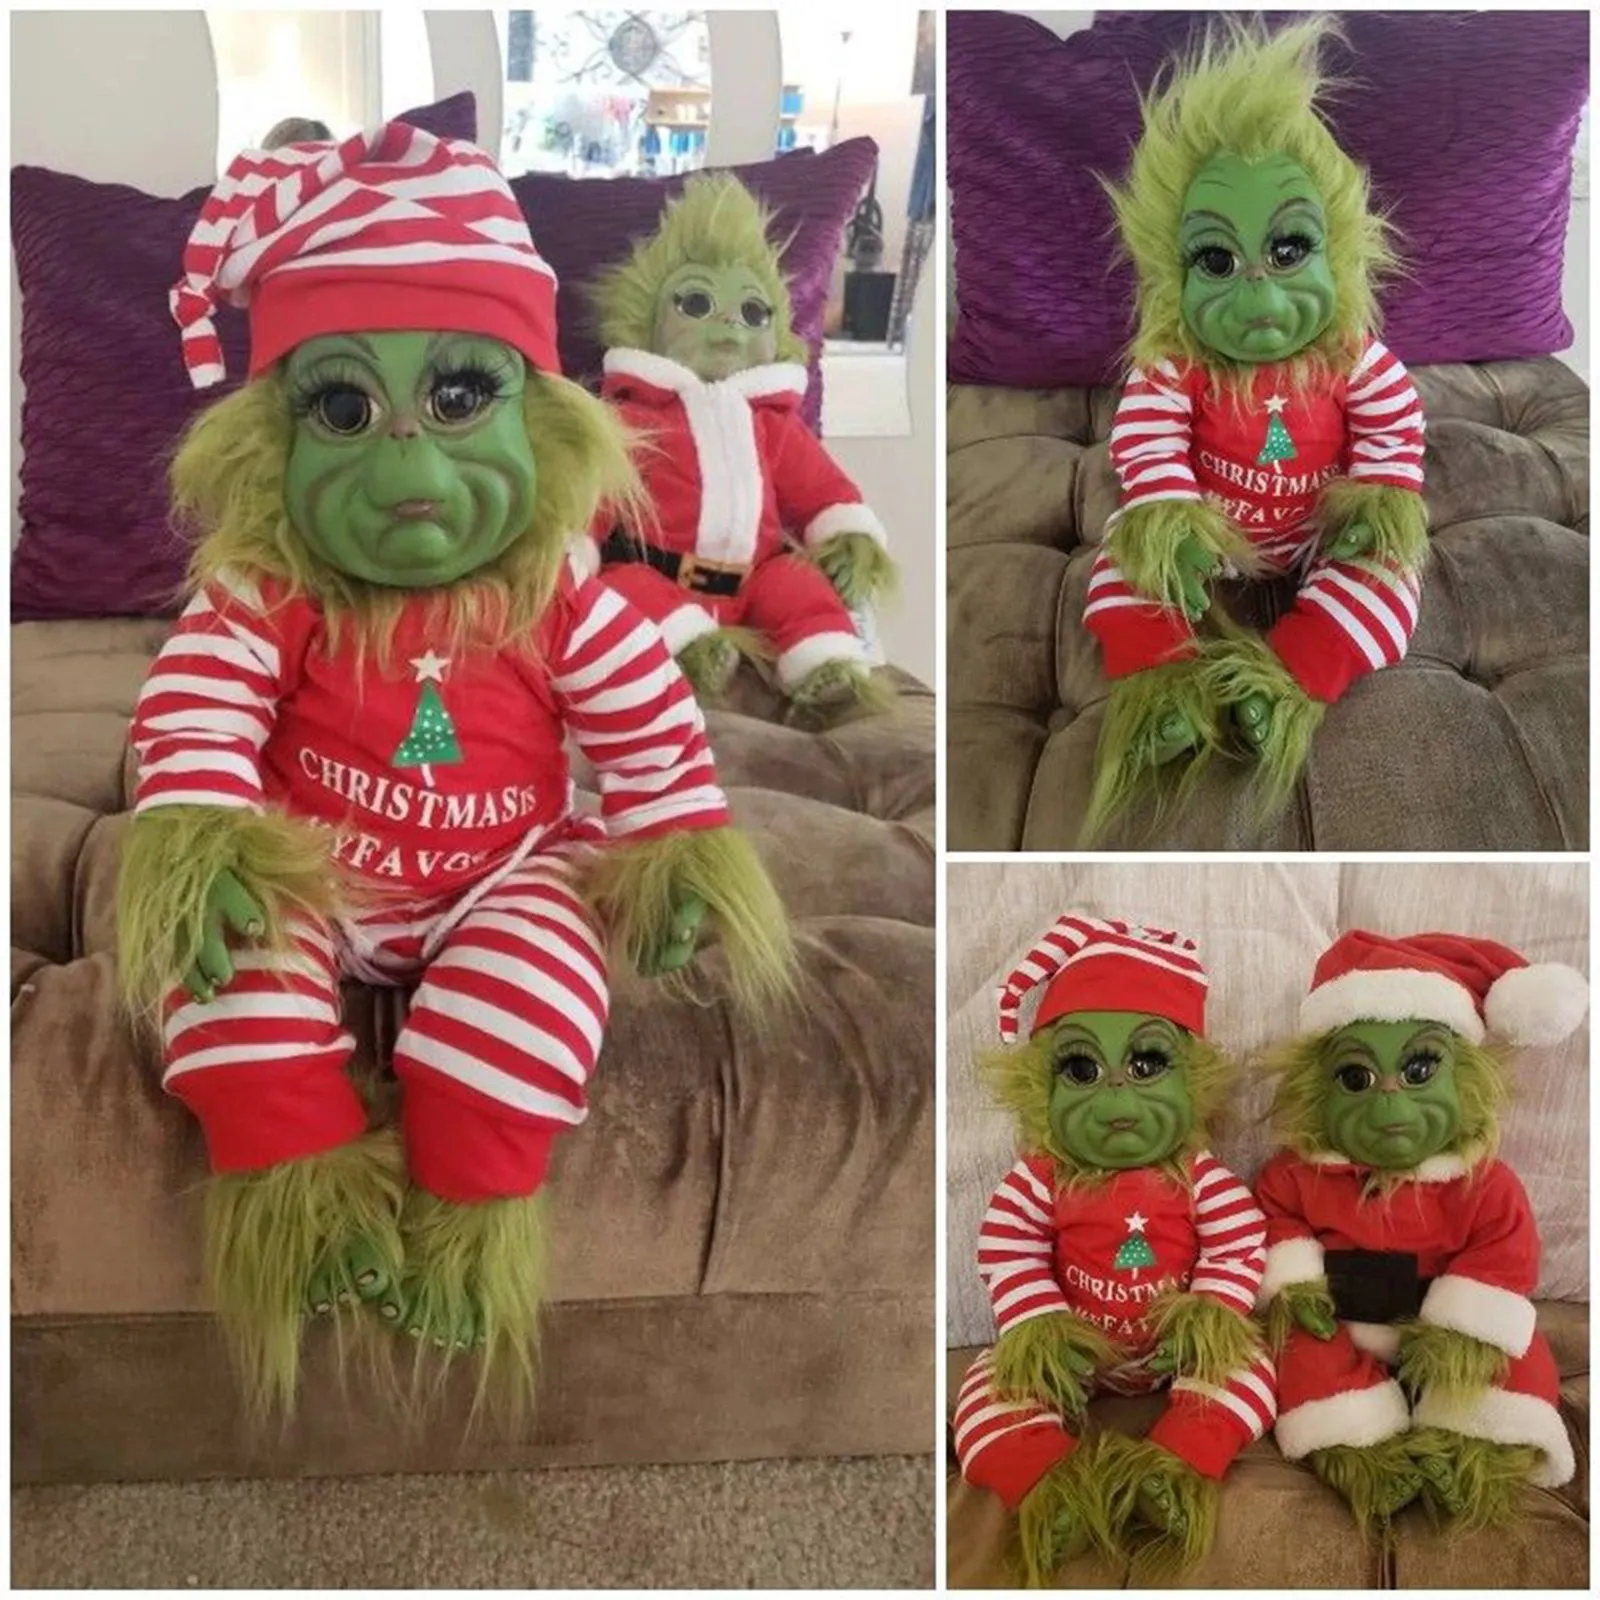 christmas grinch doll christmas grinch baby stuffed plush toy 2ifelike grinch doll christmas cute doll toy xmas gifts